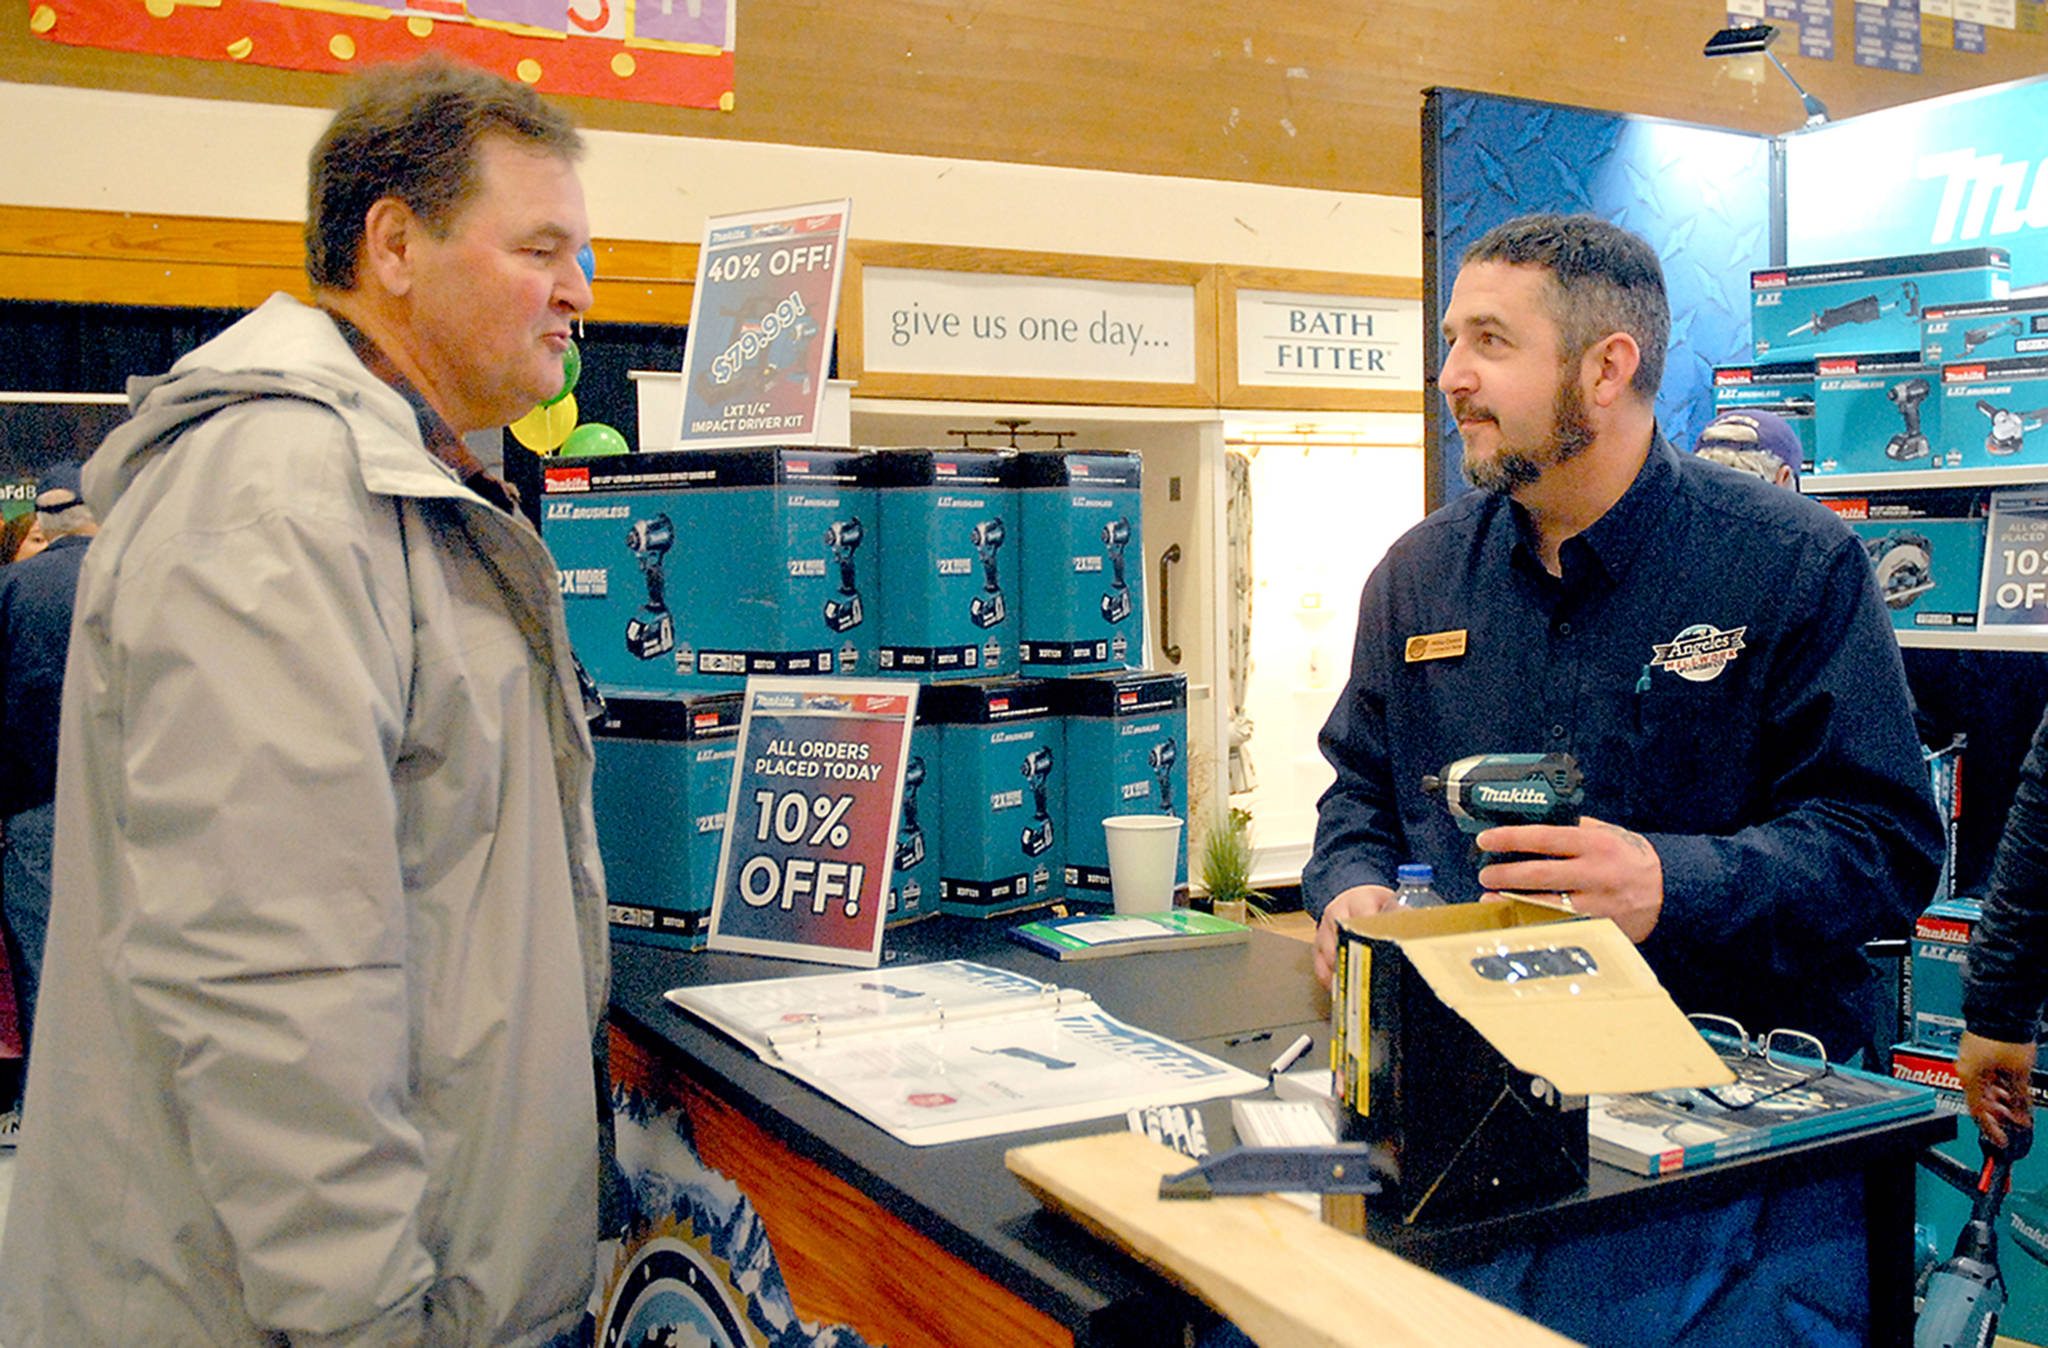 Robert Atkinson of Sequim, left, talks about power tools with Mike Deese, a contractor sales representative for Angeles Millwork at the company’s display booth at the 23rd annual Building, Remodeling and Energy Expo on Feb. 15 in the Sequim High School gym. The event, hosted by the North Peninsula Building Association, featured more than 50 vendors offering building products and services. Photo by Keith Thorpe/Olympic Peninsula News Group